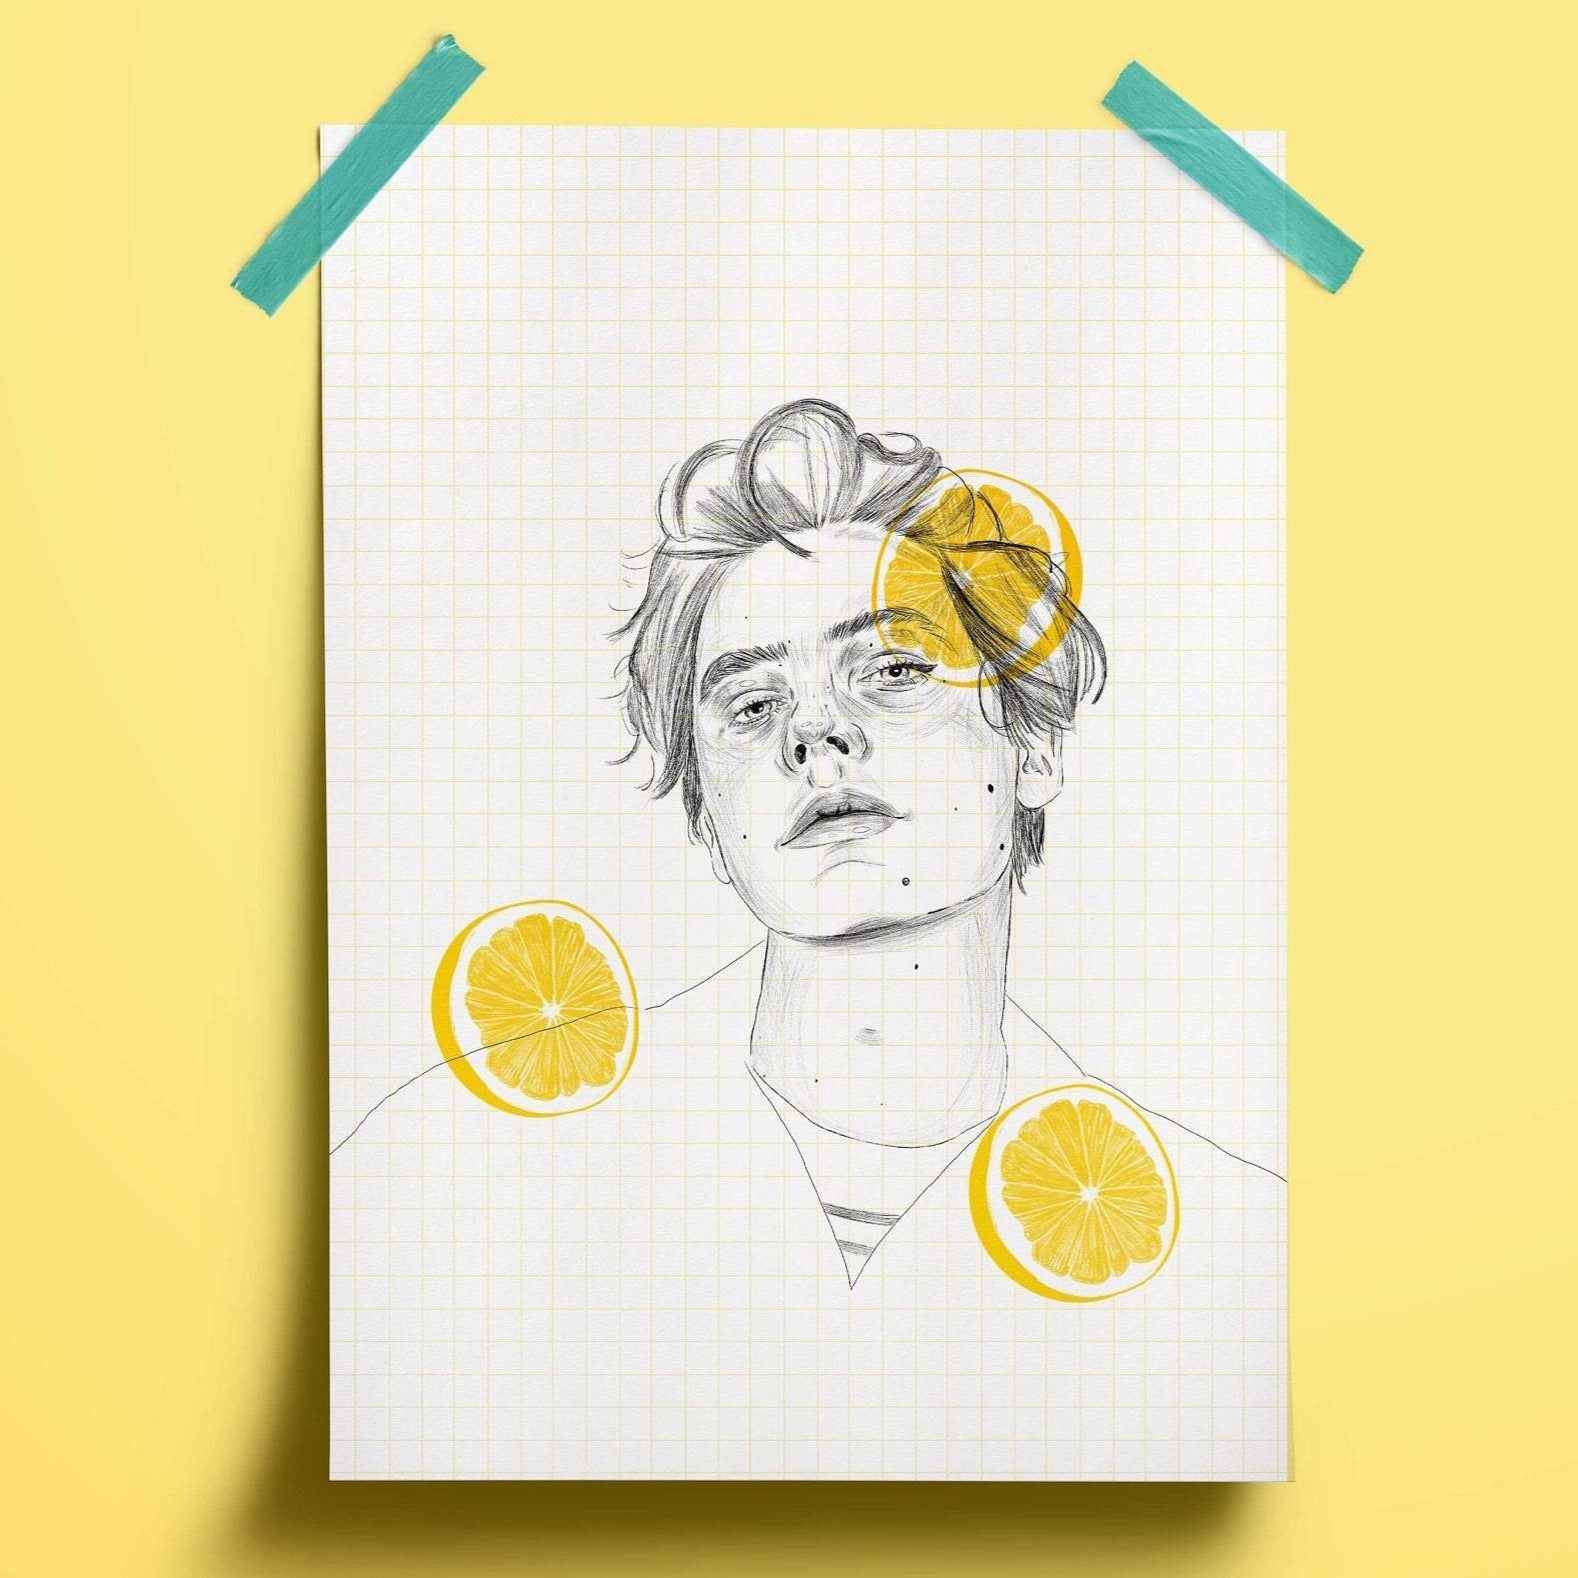 illustration print of Cole sprouse hand drawn in biro. behind him is a grid texture in a pale yellow. There is a motif of lemon slices around the portrait.